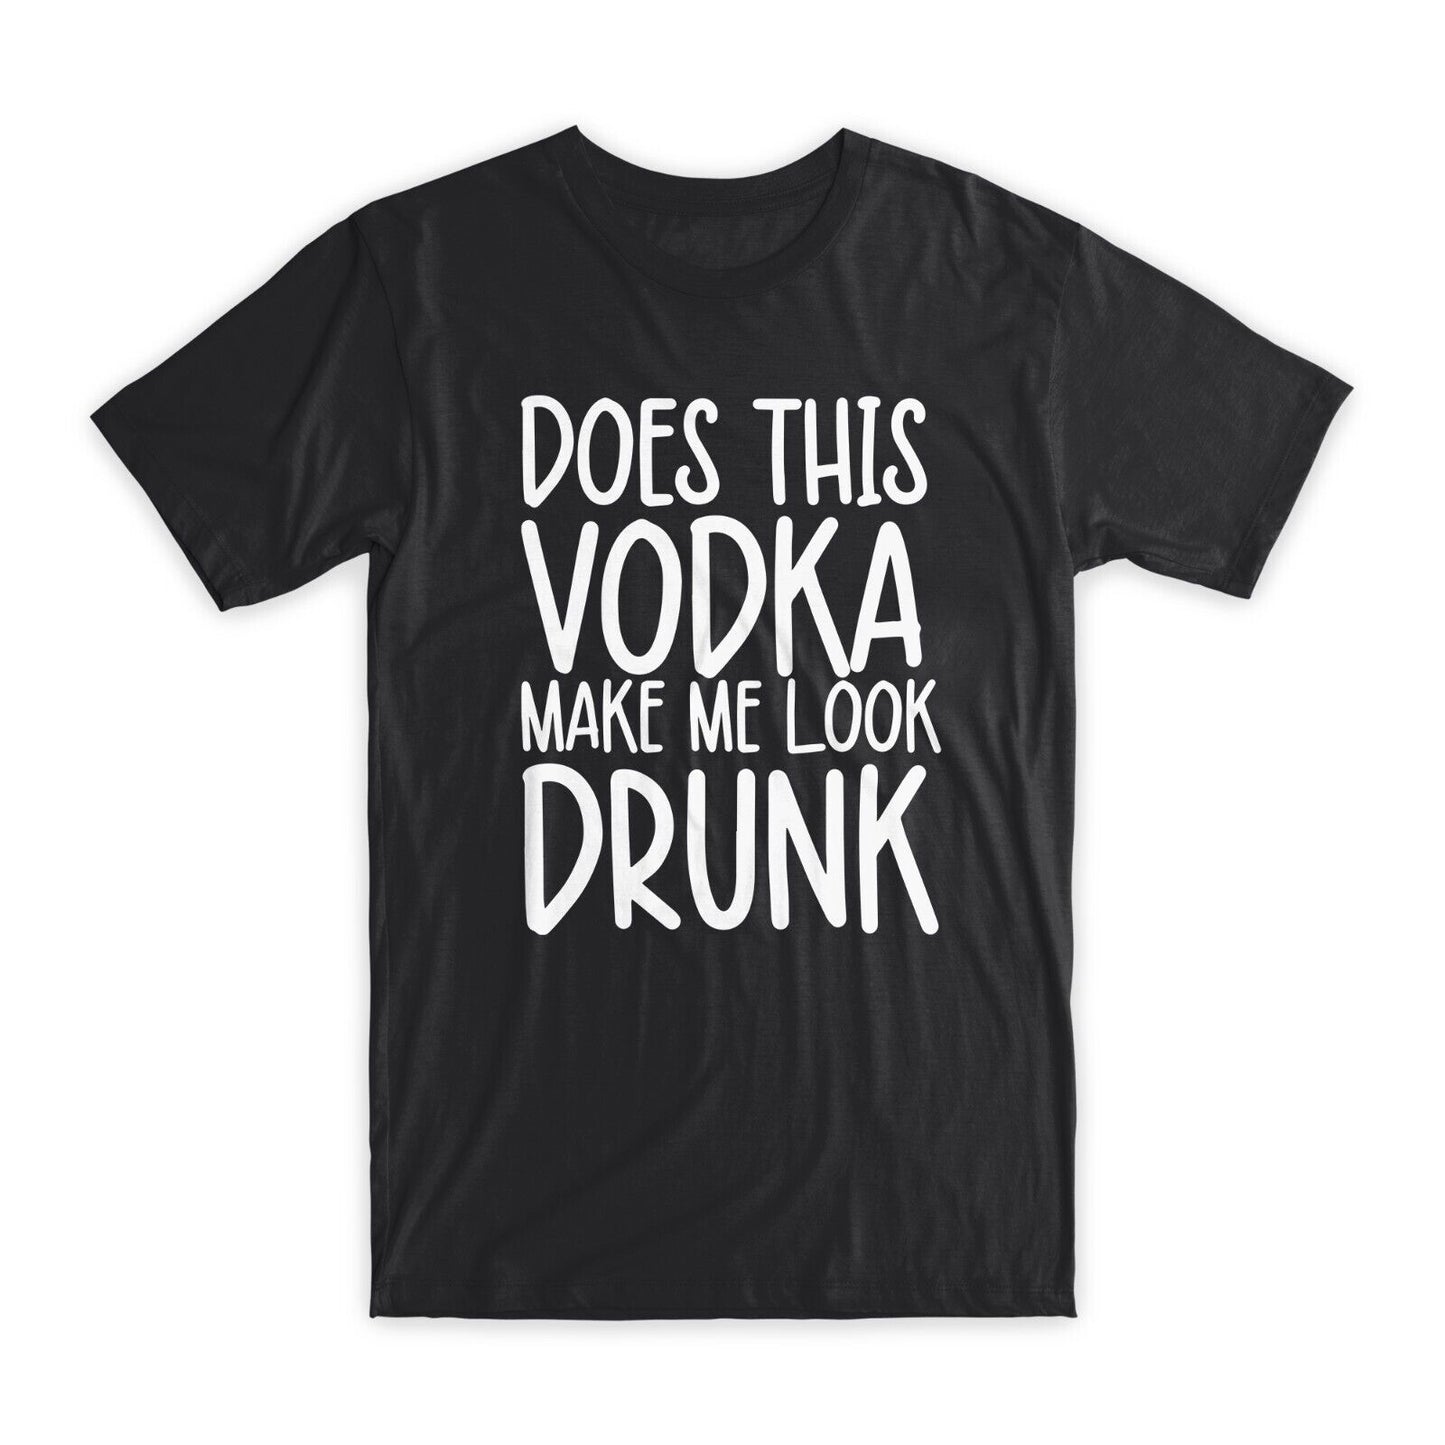 Does This Vodka Make Me Look Drunk T-Shirt Premium Soft Cotton Funny T Gift NEW